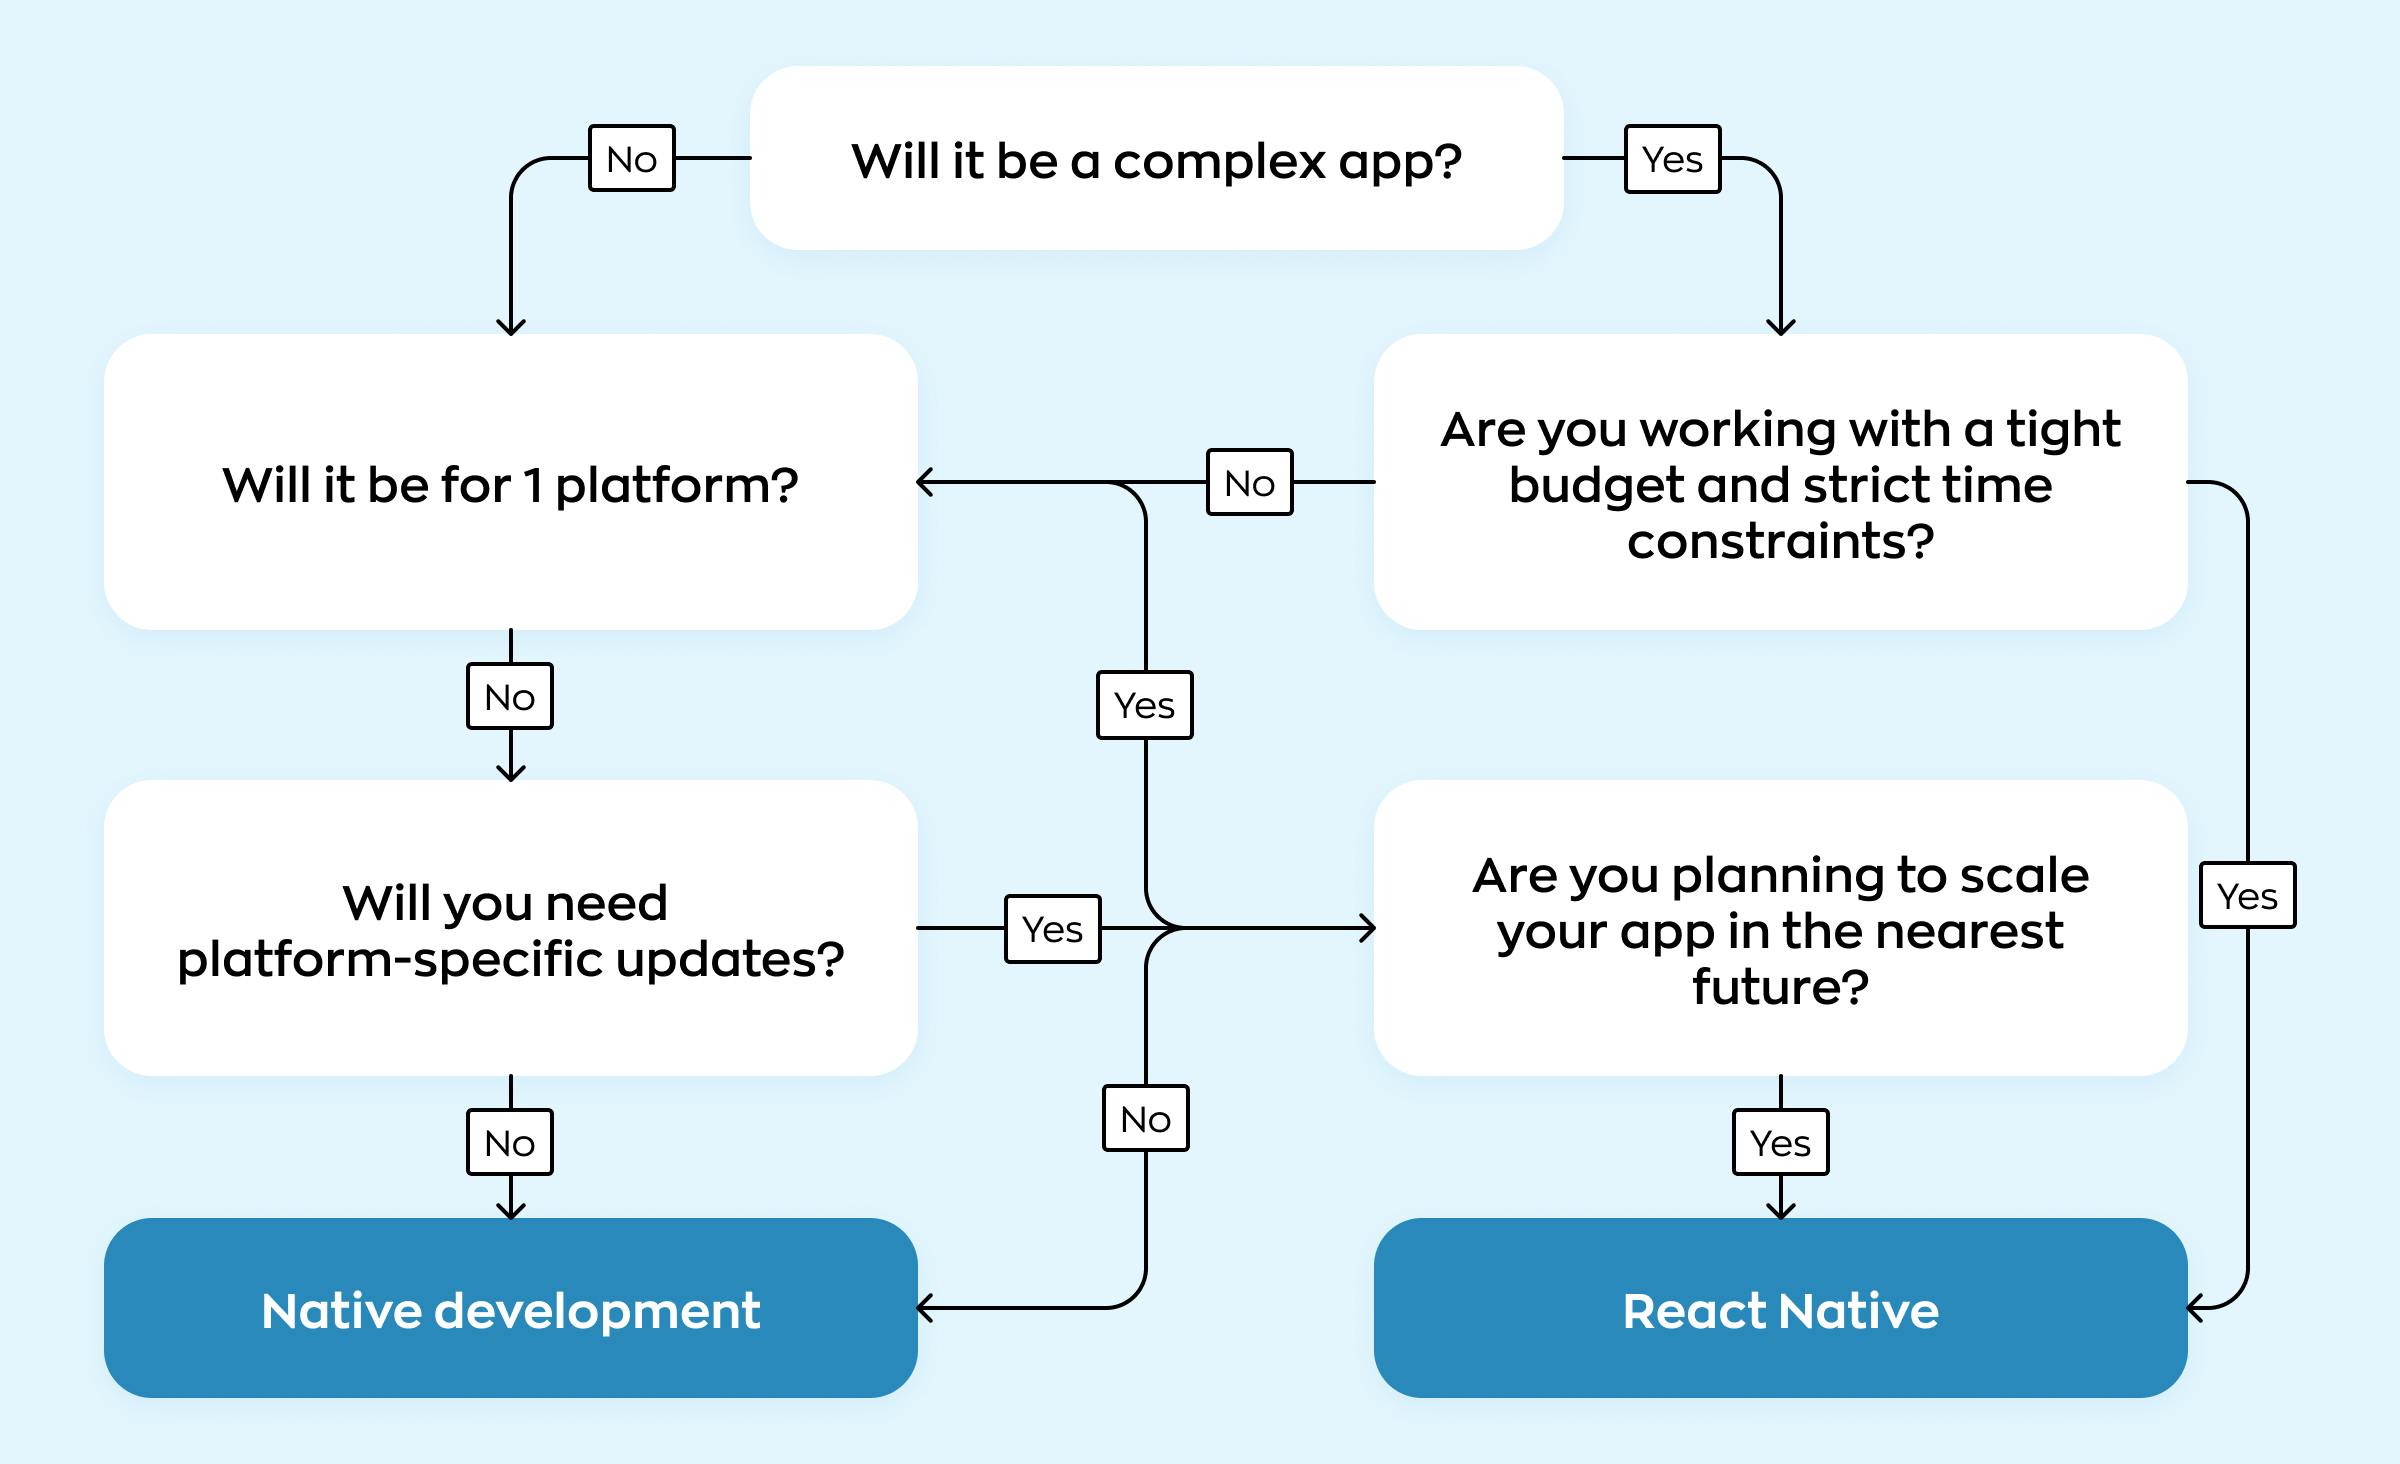 A short quiz summarizing the criteria of choice and helping to determine whether to opt for React Native or native app development